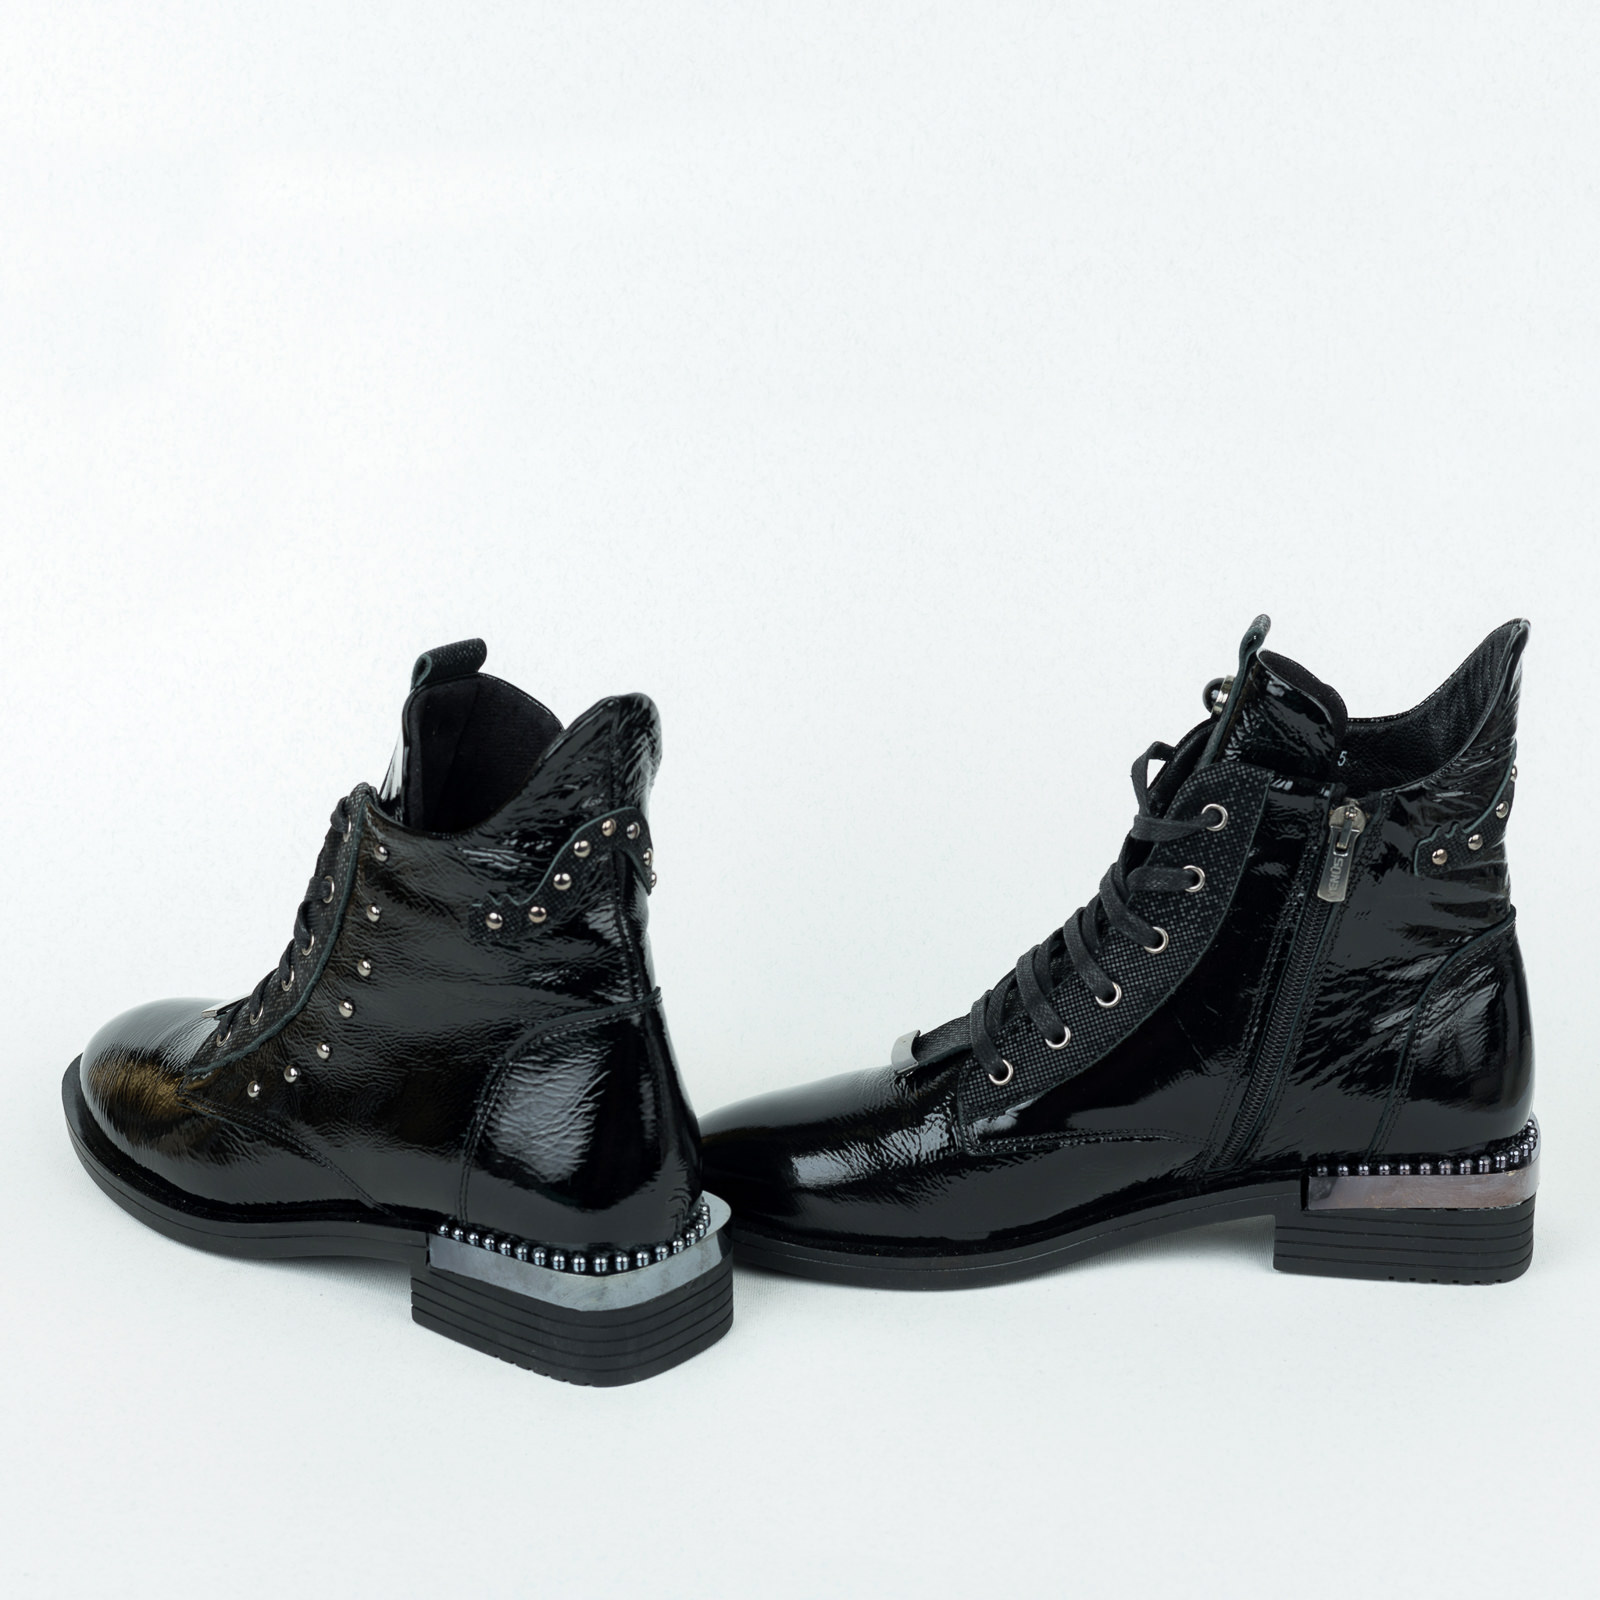 Leather ankle boots B651 - BLACK